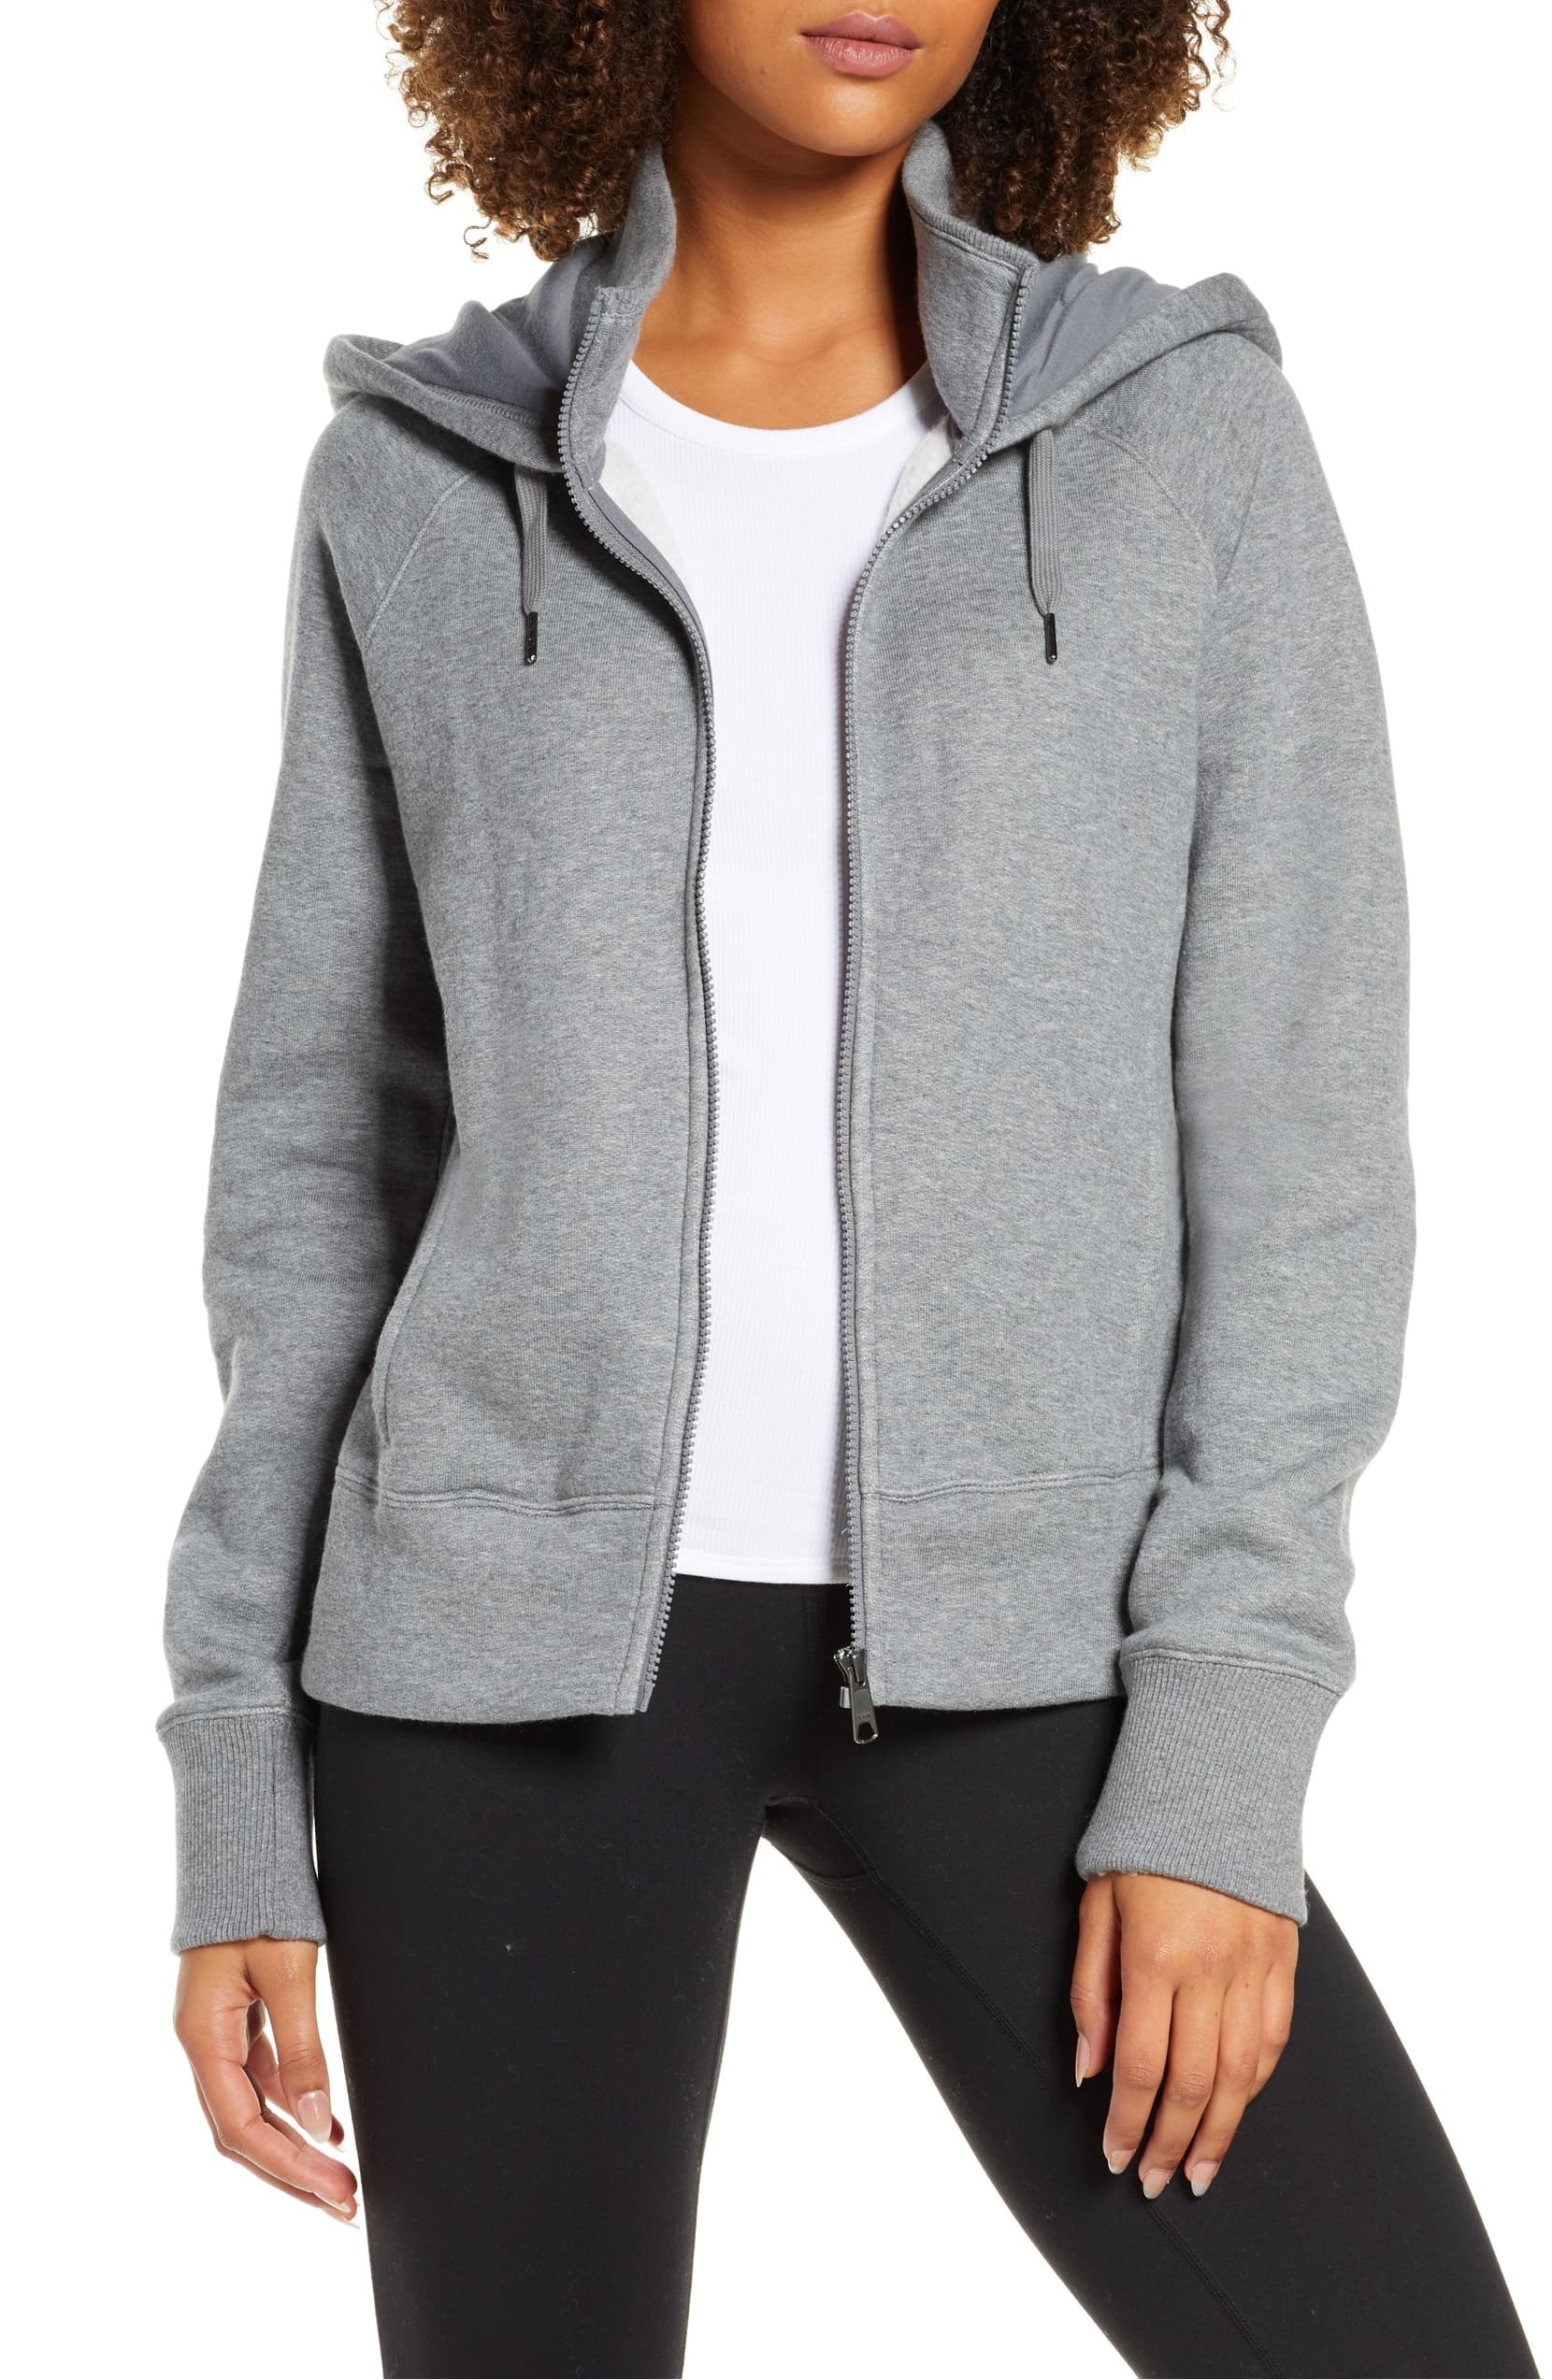 28 Of The Comfiest Things You Can Get At Nordstrom